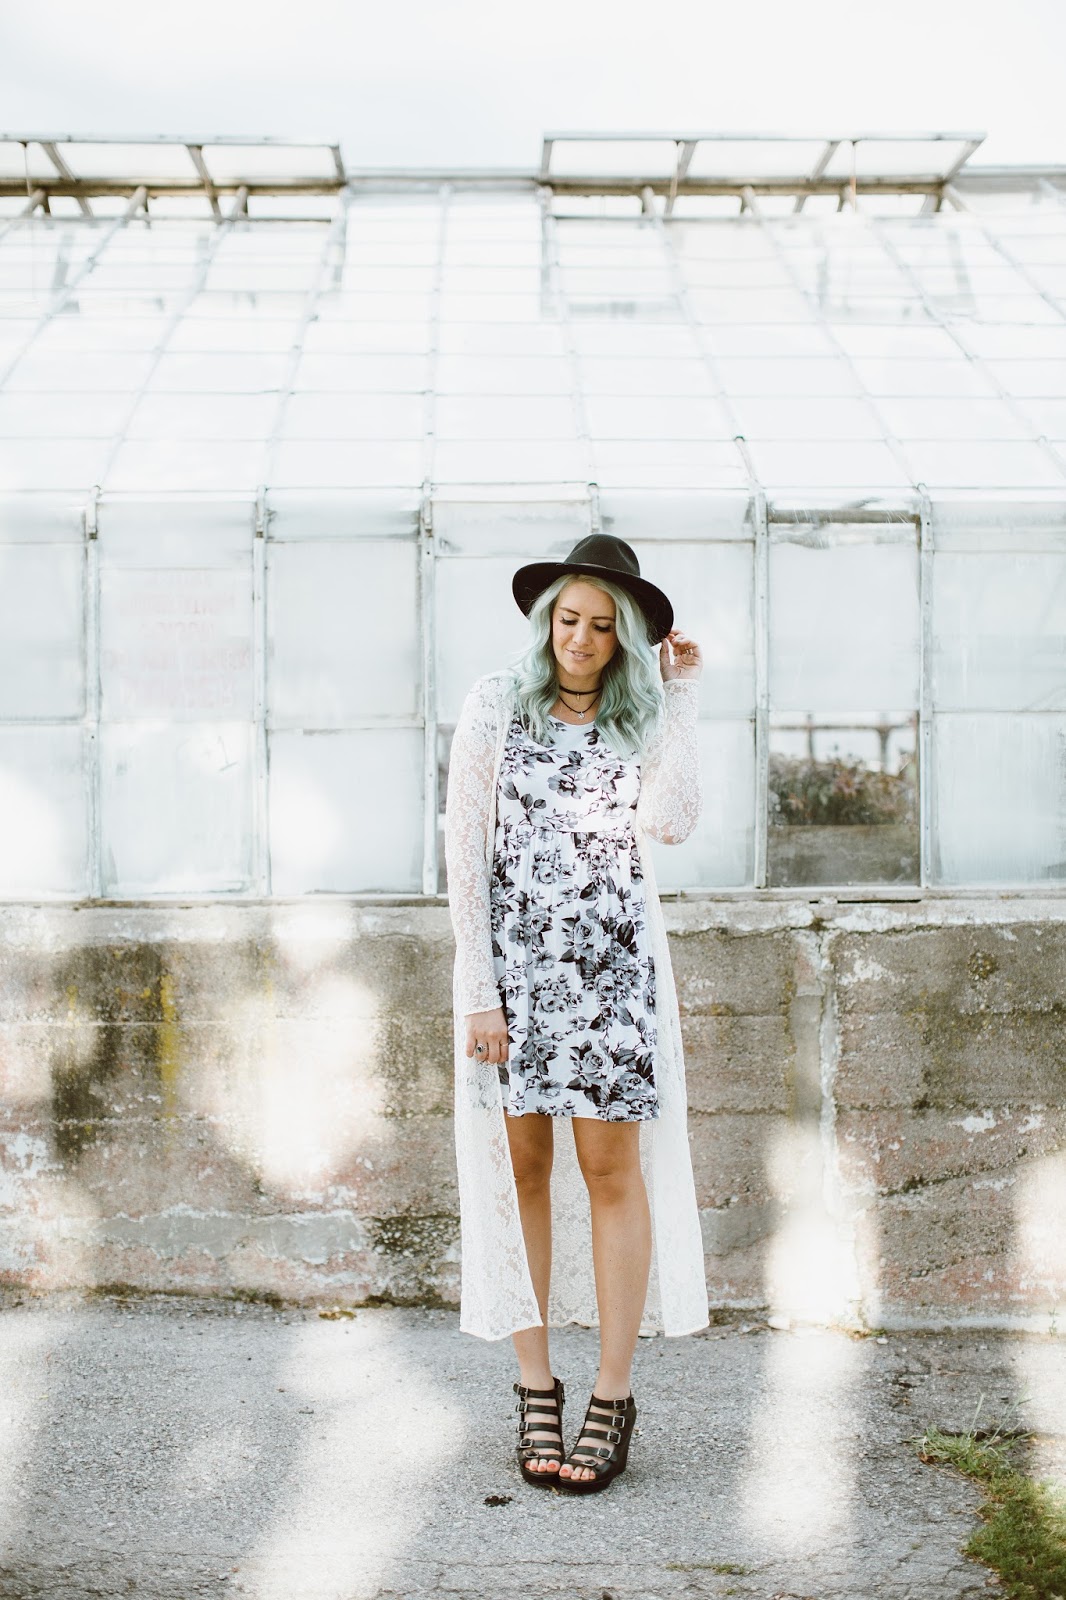 Black and White Floral Dress, Lace Cardigan, Black Wedges